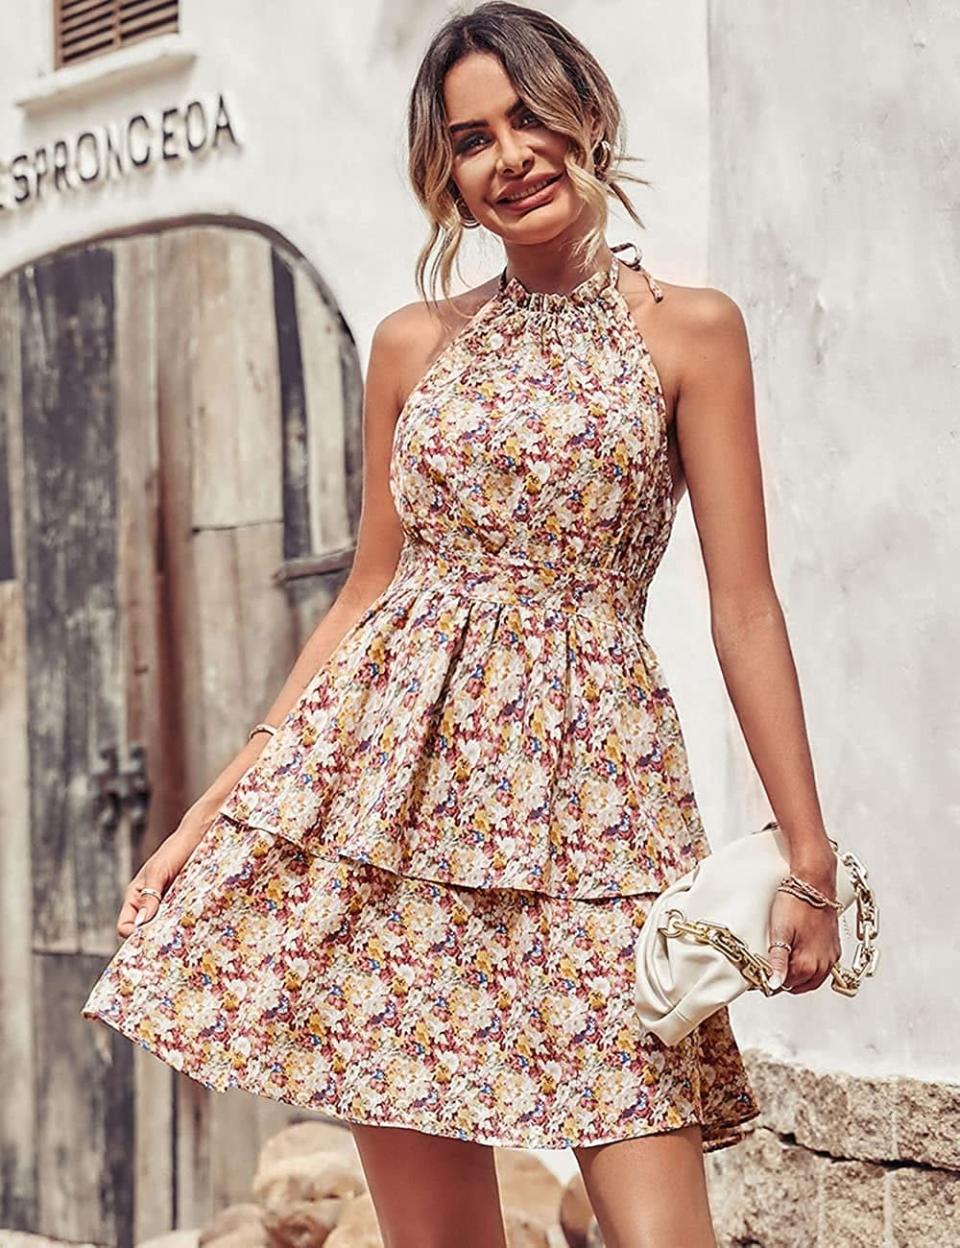 <p>The <span>PrettyGarden Summer Boho Floral Sundress Halter Neck Tiered Ruffle Mini Swing Dress </span> ($33, originally $41) is a stunning floral minidress that's perfect for summer vacations and brunches with your besties. It has a tie halterneck and an elastic waist for a flattering silhouette. It comes in a variety of floral designs and colors.</p>